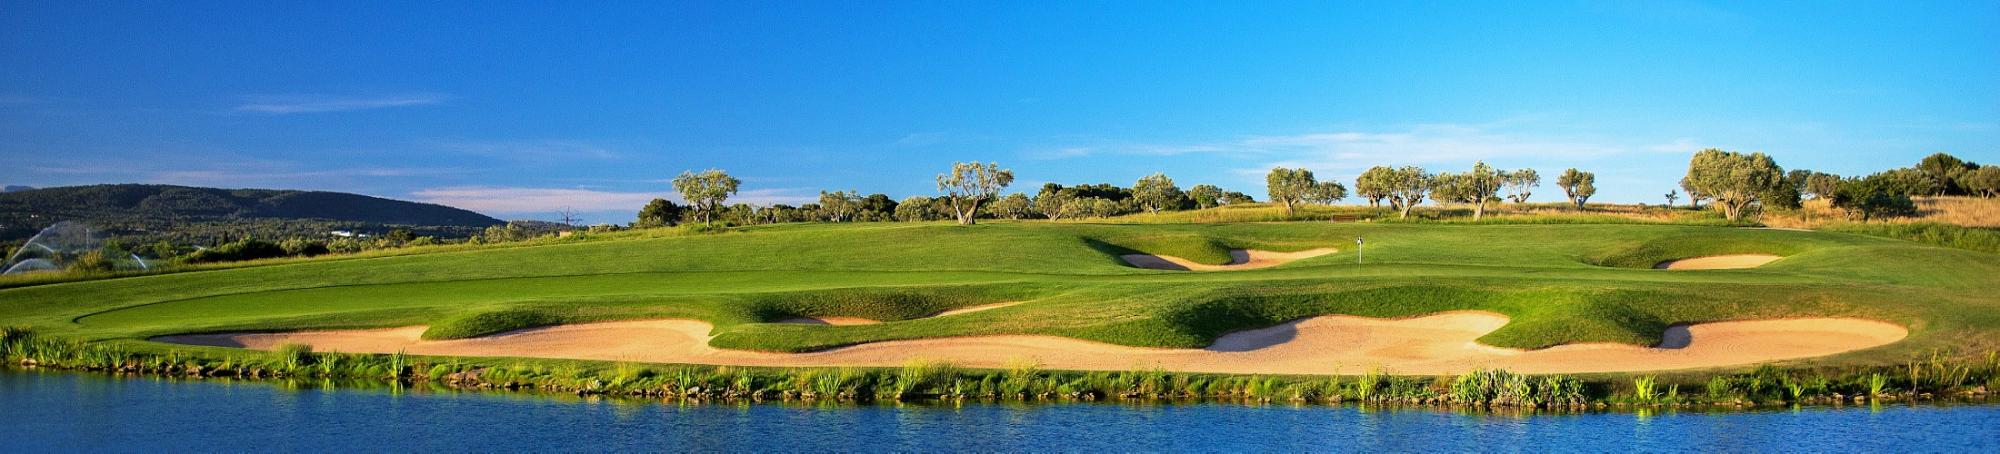 The Golf Son Gual's lovely golf course situated in brilliant Mallorca.